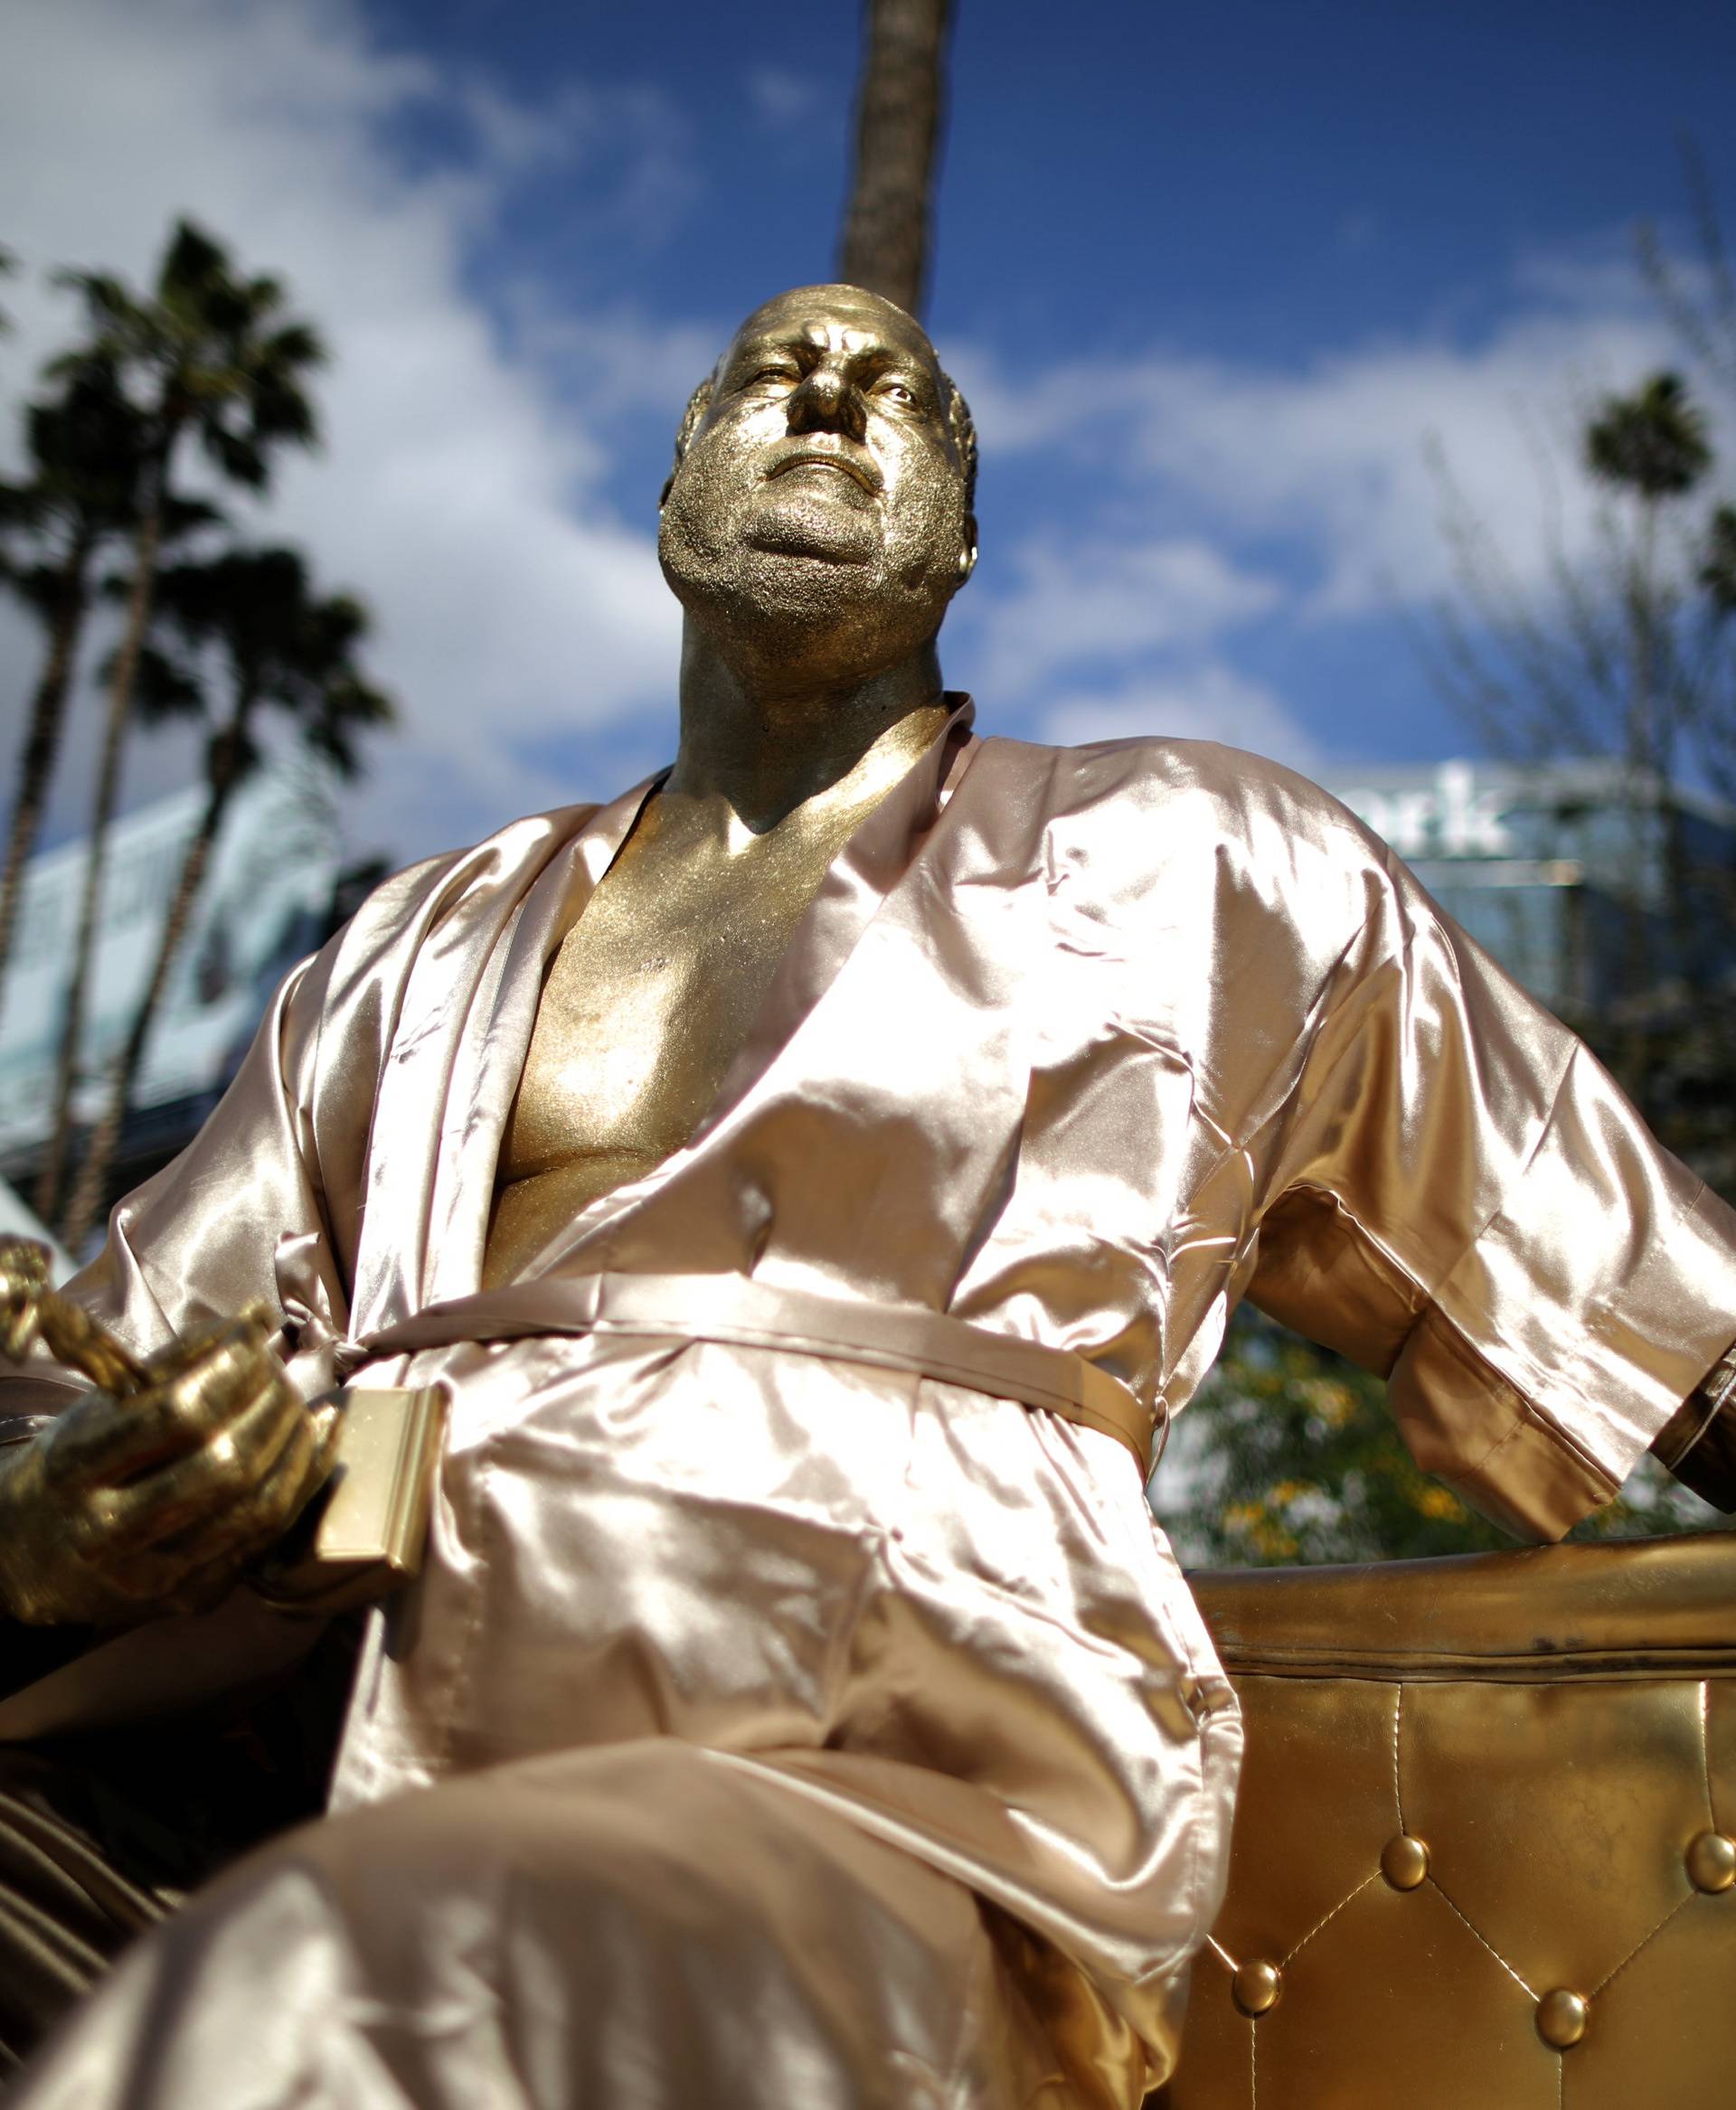 A statue of Harvey Weinstein on a casting couch made by artist Plastic Jesus is seen on Hollywood Boulevard near the Dolby Theatre during preparations for the Oscars in Hollywood, Los Angeles